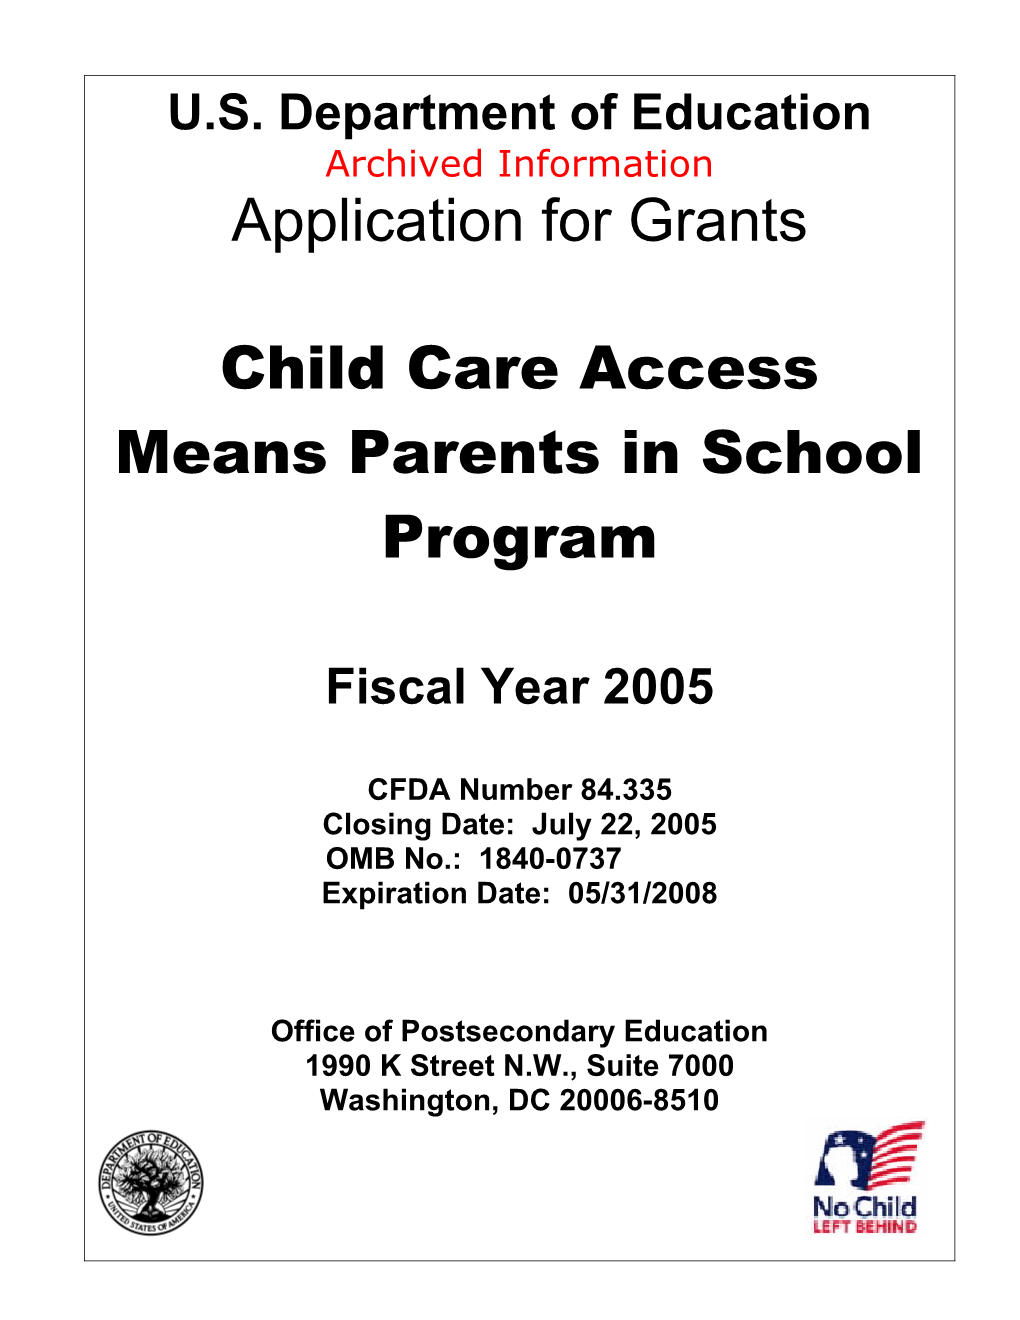 Archived: FY05 Application for the Child Care Access Means Parents in School Program (MS Word)